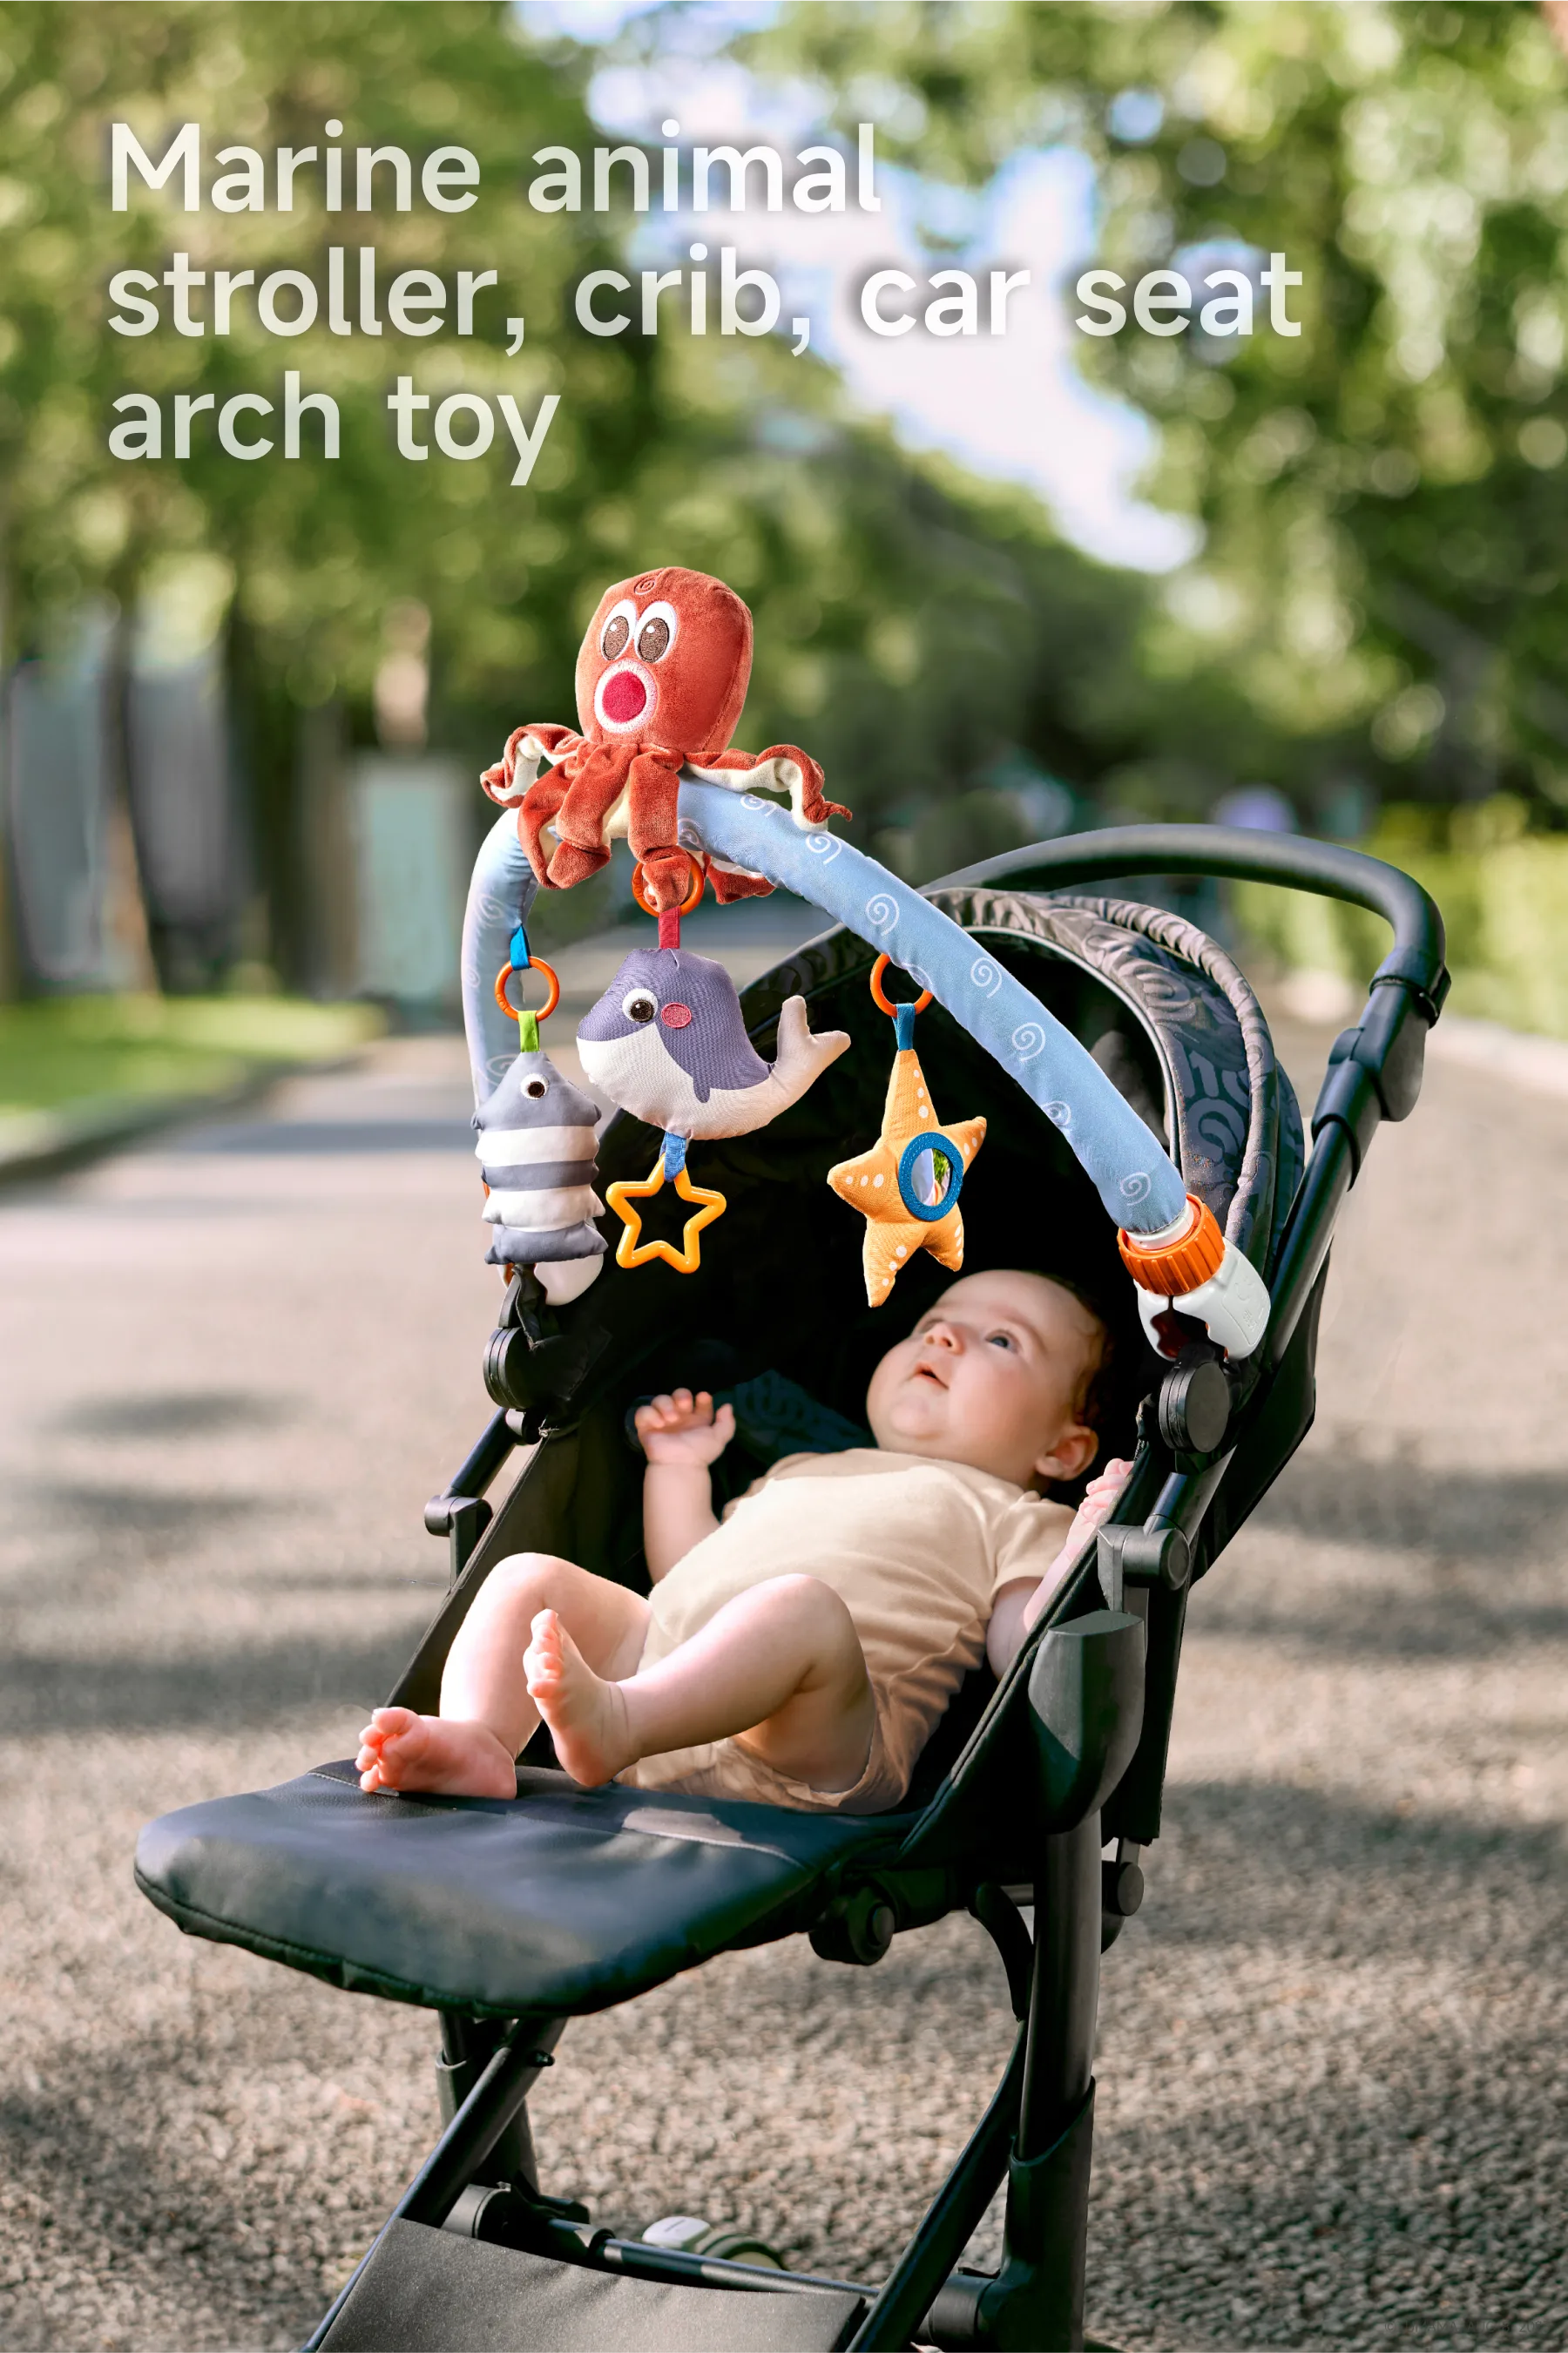 Travel play arch for car seat stroller crib entertainment